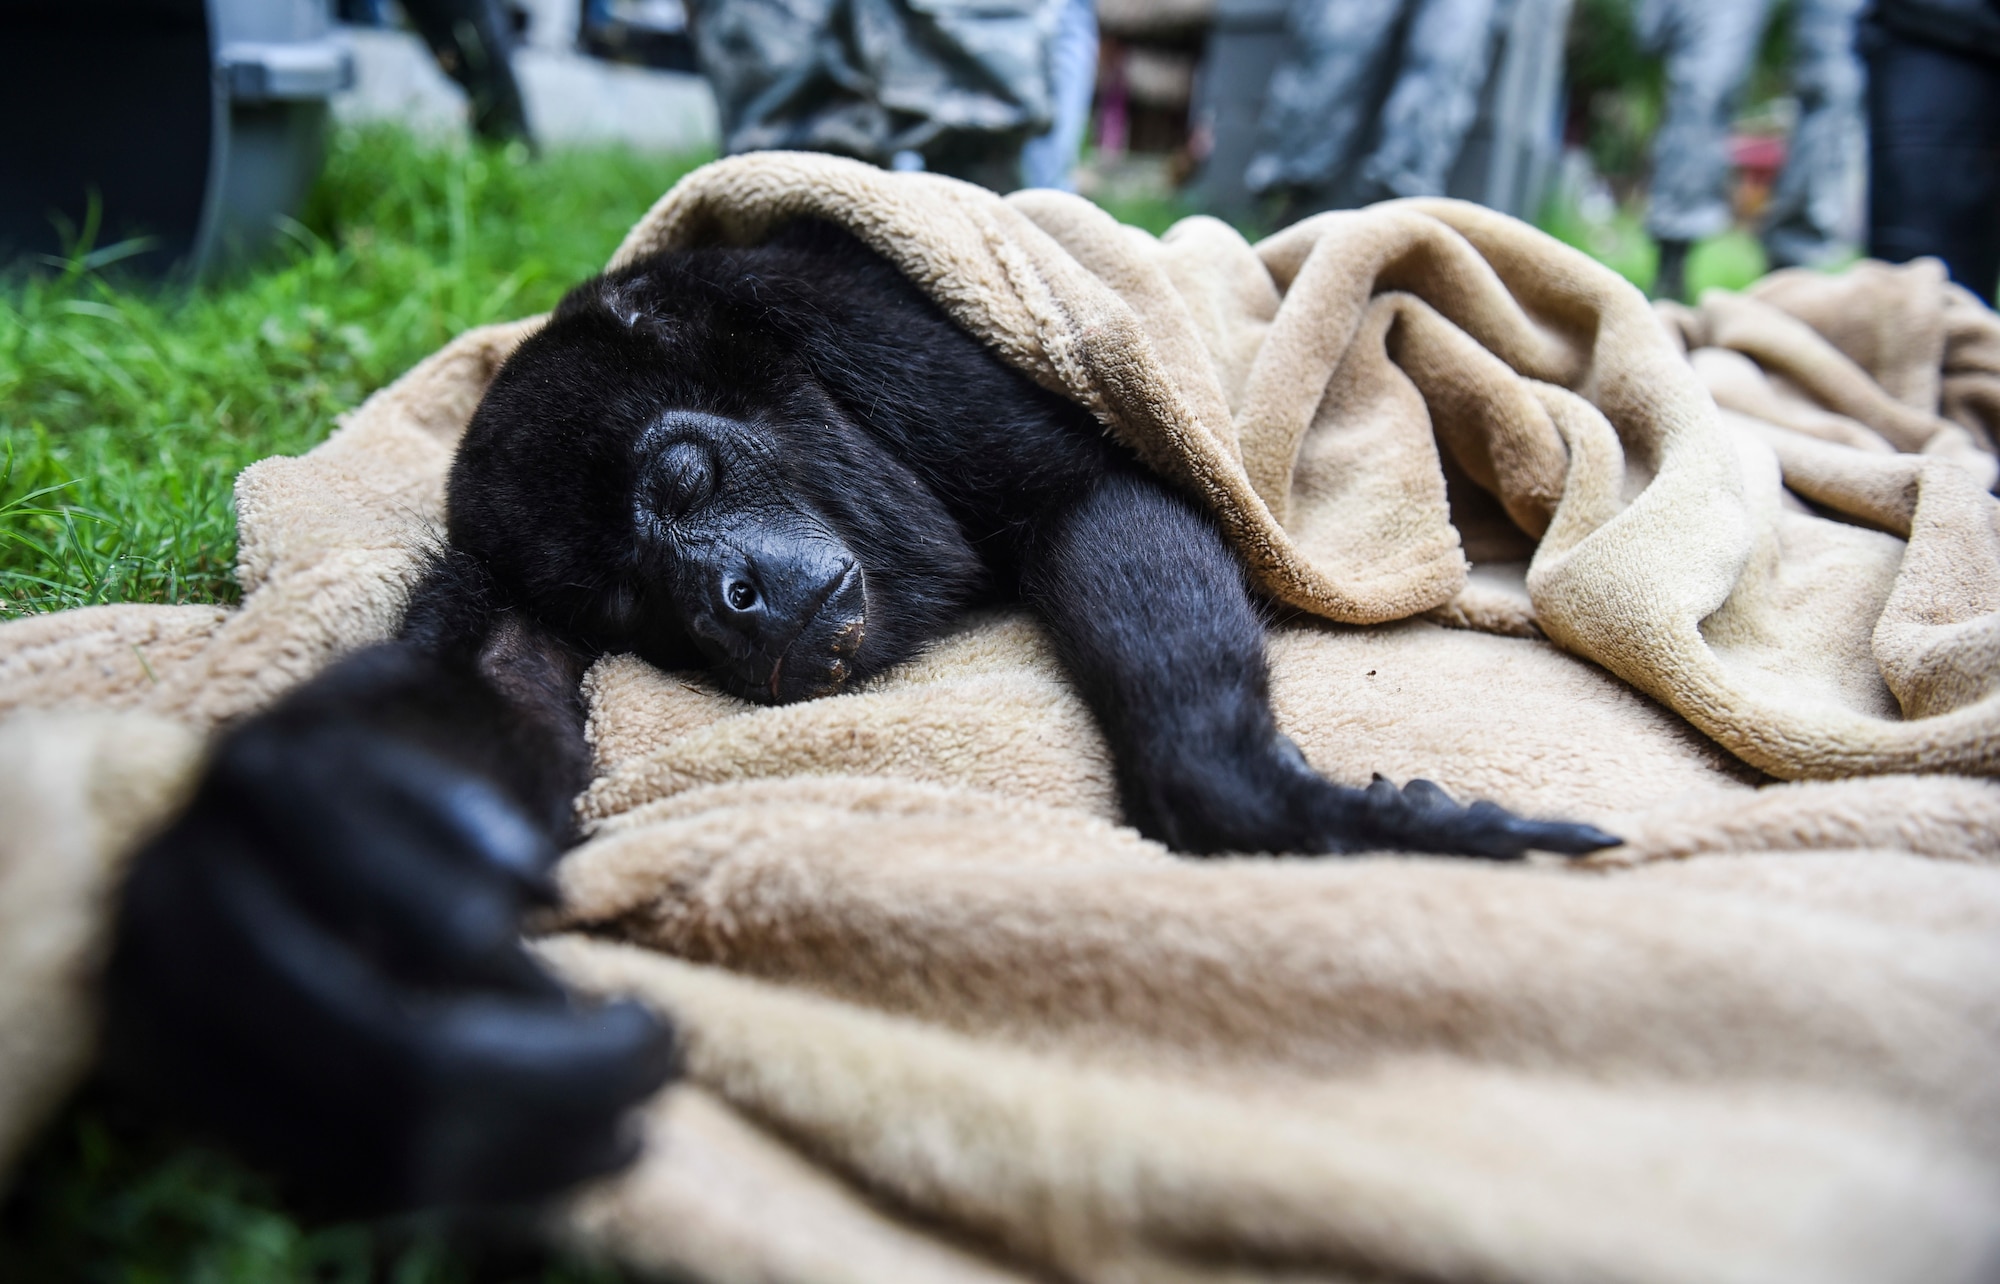 A monkey lays wrapped in a blanket after being tranquilized in Meteti, Panama, June 6, 2018. The monkey was tranquilized by U.S. Air Force doctors working with Panamanian counterparts as part of an Emerging Infectious Diseases Training Event during Exercise New Horizons 2018. (U.S. Air Force photo by Senior Airman Dustin Mullen)